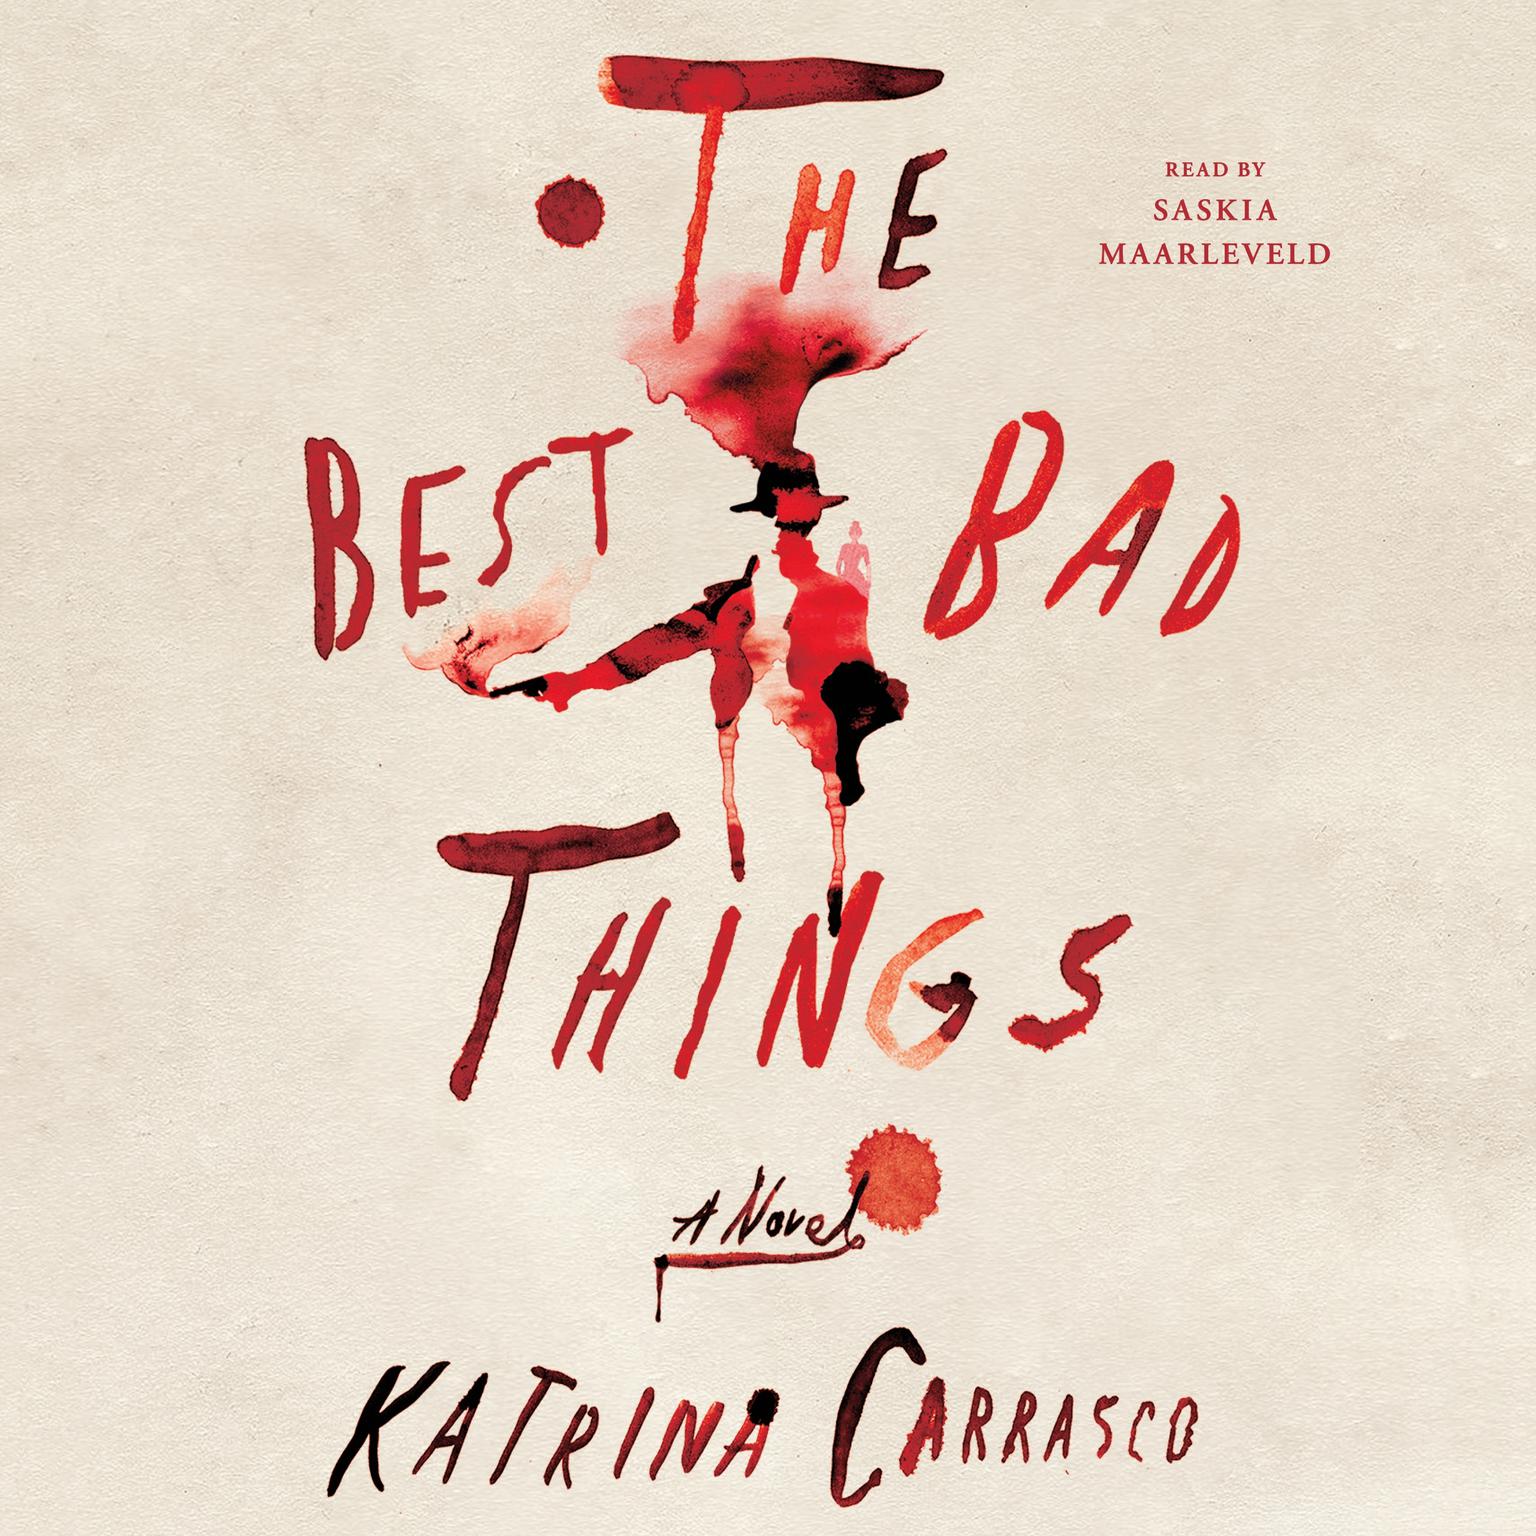 The Best Bad Things: A Novel Audiobook, by Katrina Carrasco